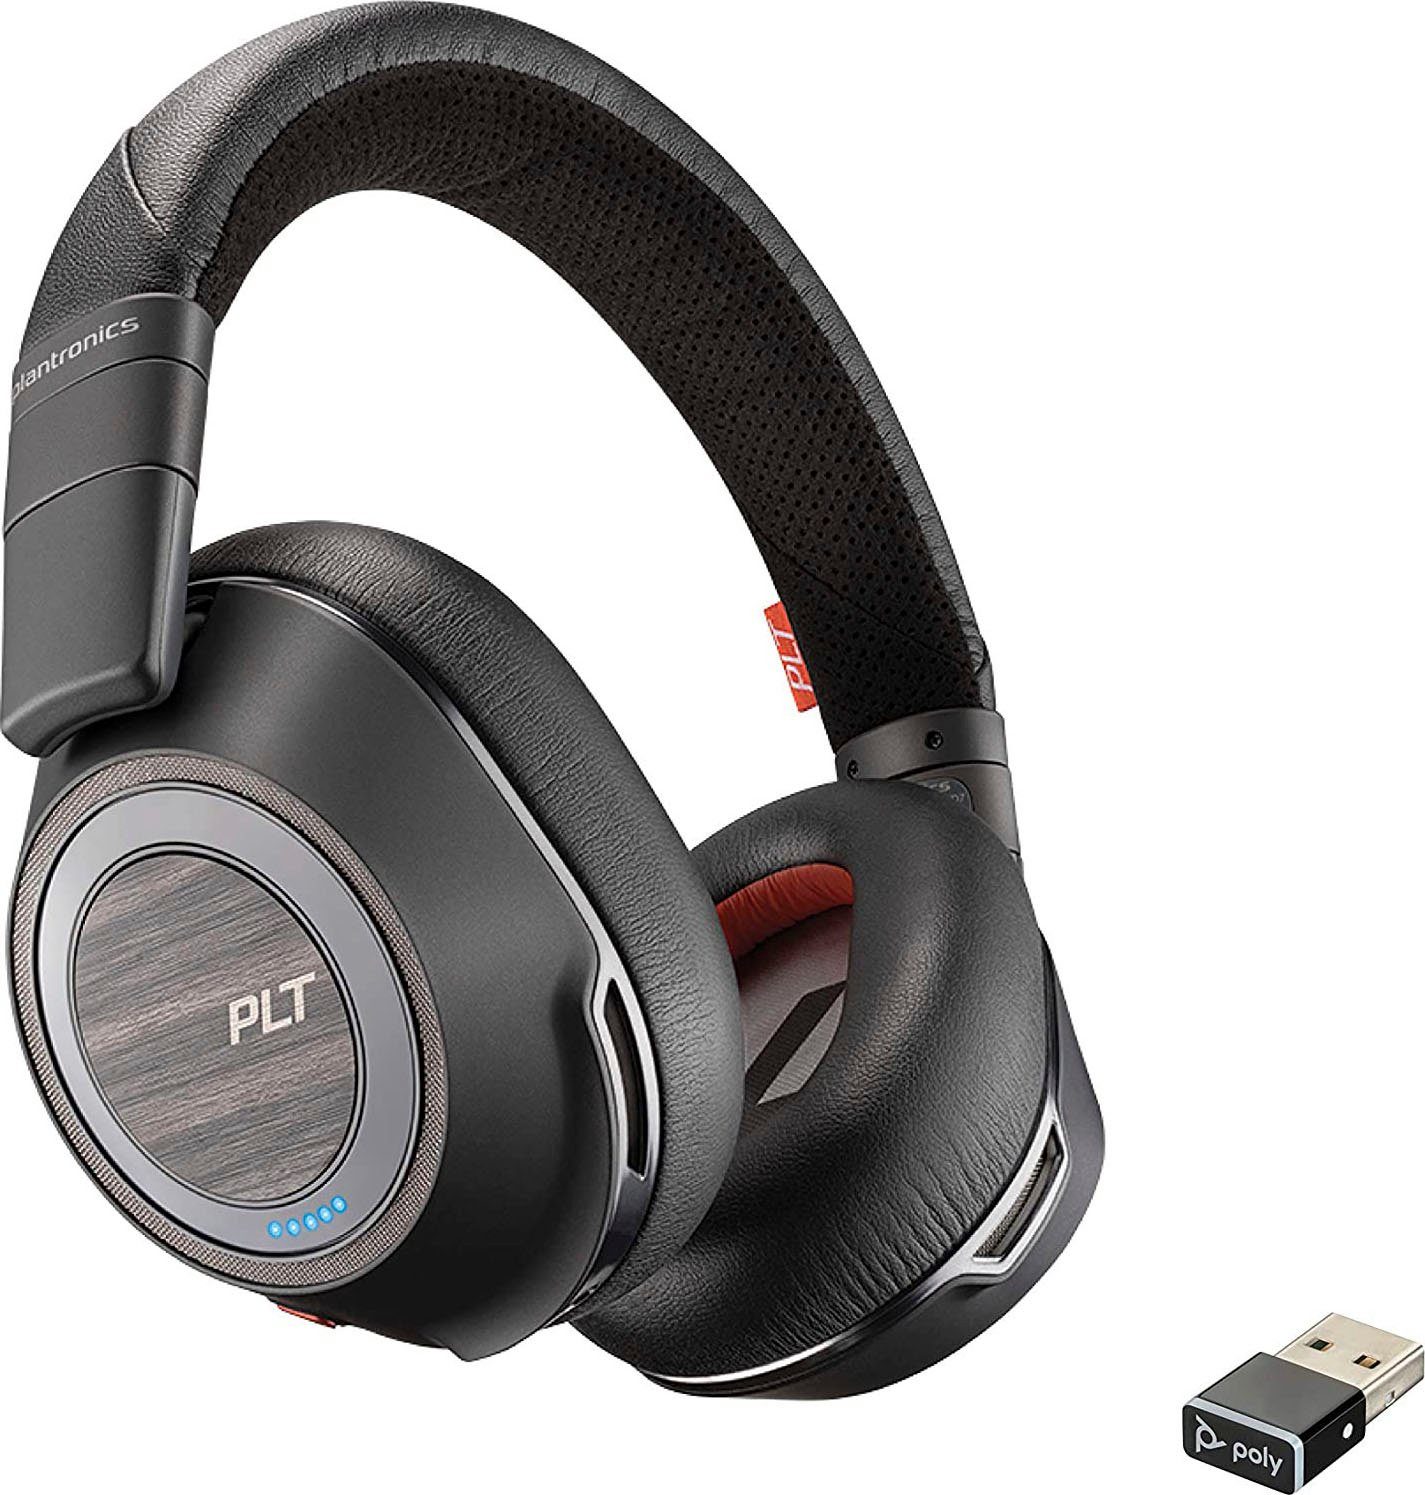 Plantronics Poly Voyager 8200 UC (Noise-Cancelling, Steuerung HSP) AVRCP Bluetooth Remote Control Anrufe integrierte Video Bluetooth und Audio Wireless-Headset Profile), A2DP (Audio Profile), Musik, für (Advanced HFP, Distribution